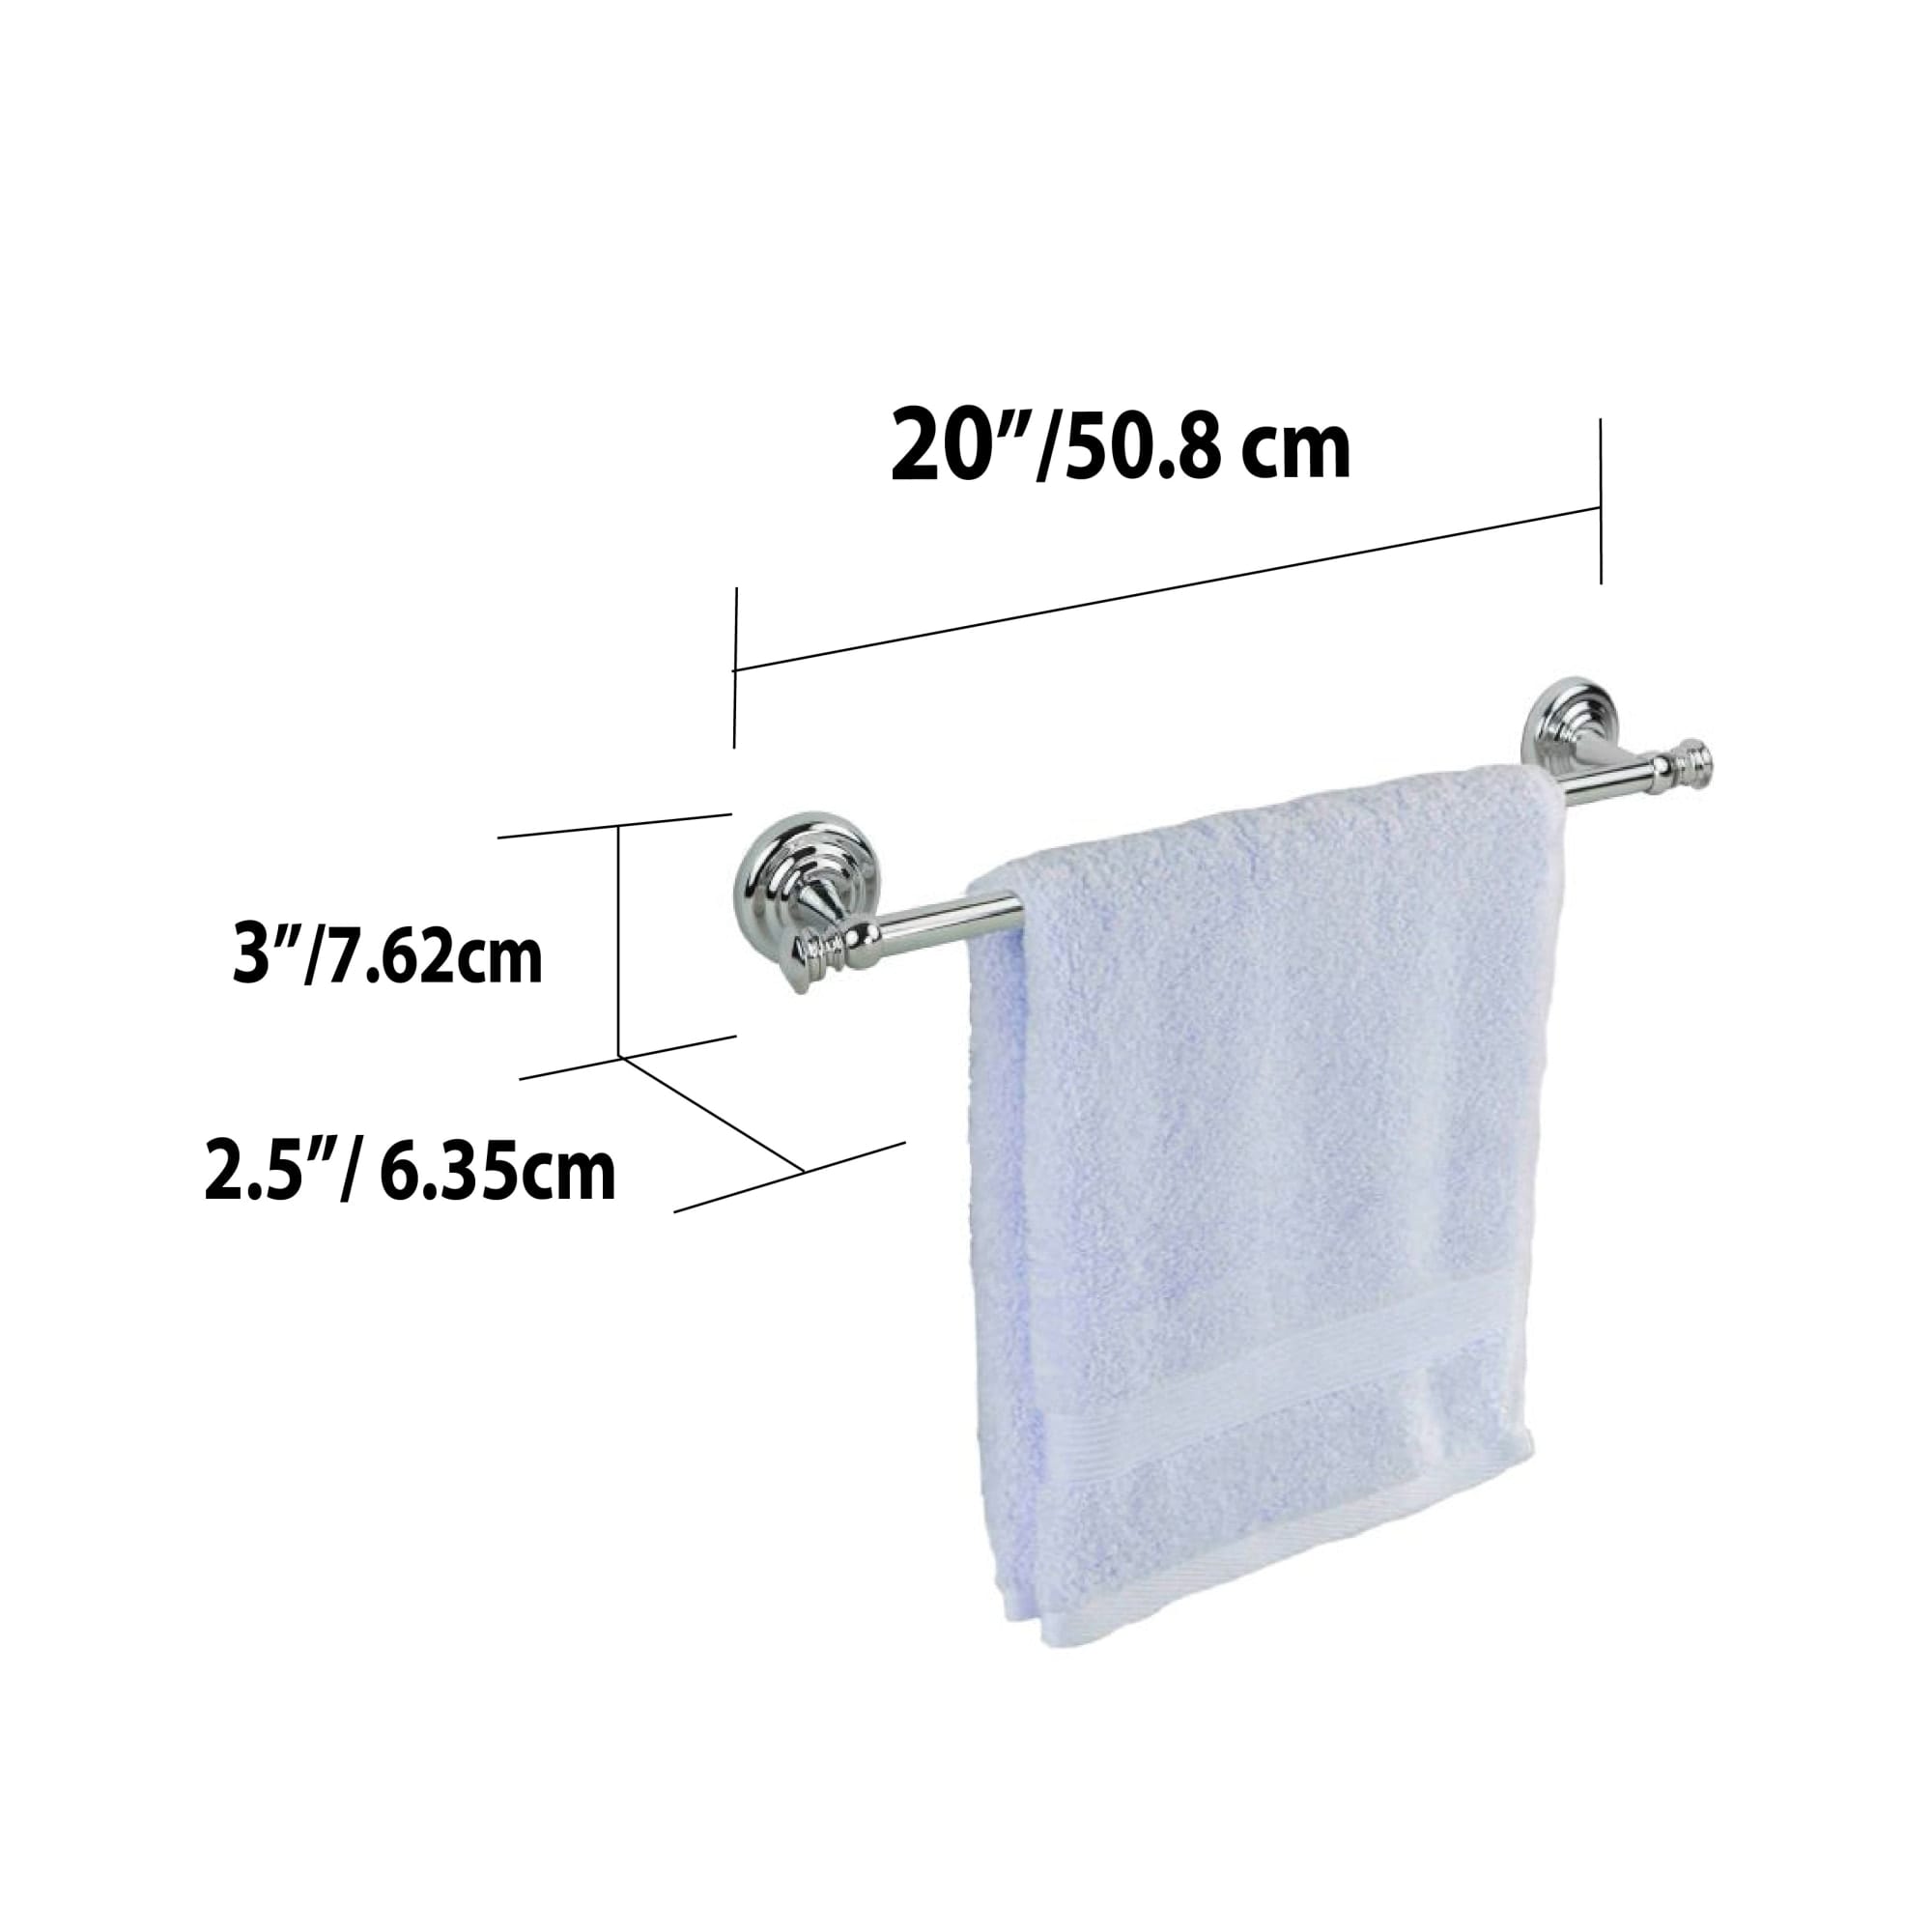 Home Basics Chrome Plated Steel Wall-Mounted Towel Rail $10.00 EACH, CASE PACK OF 12